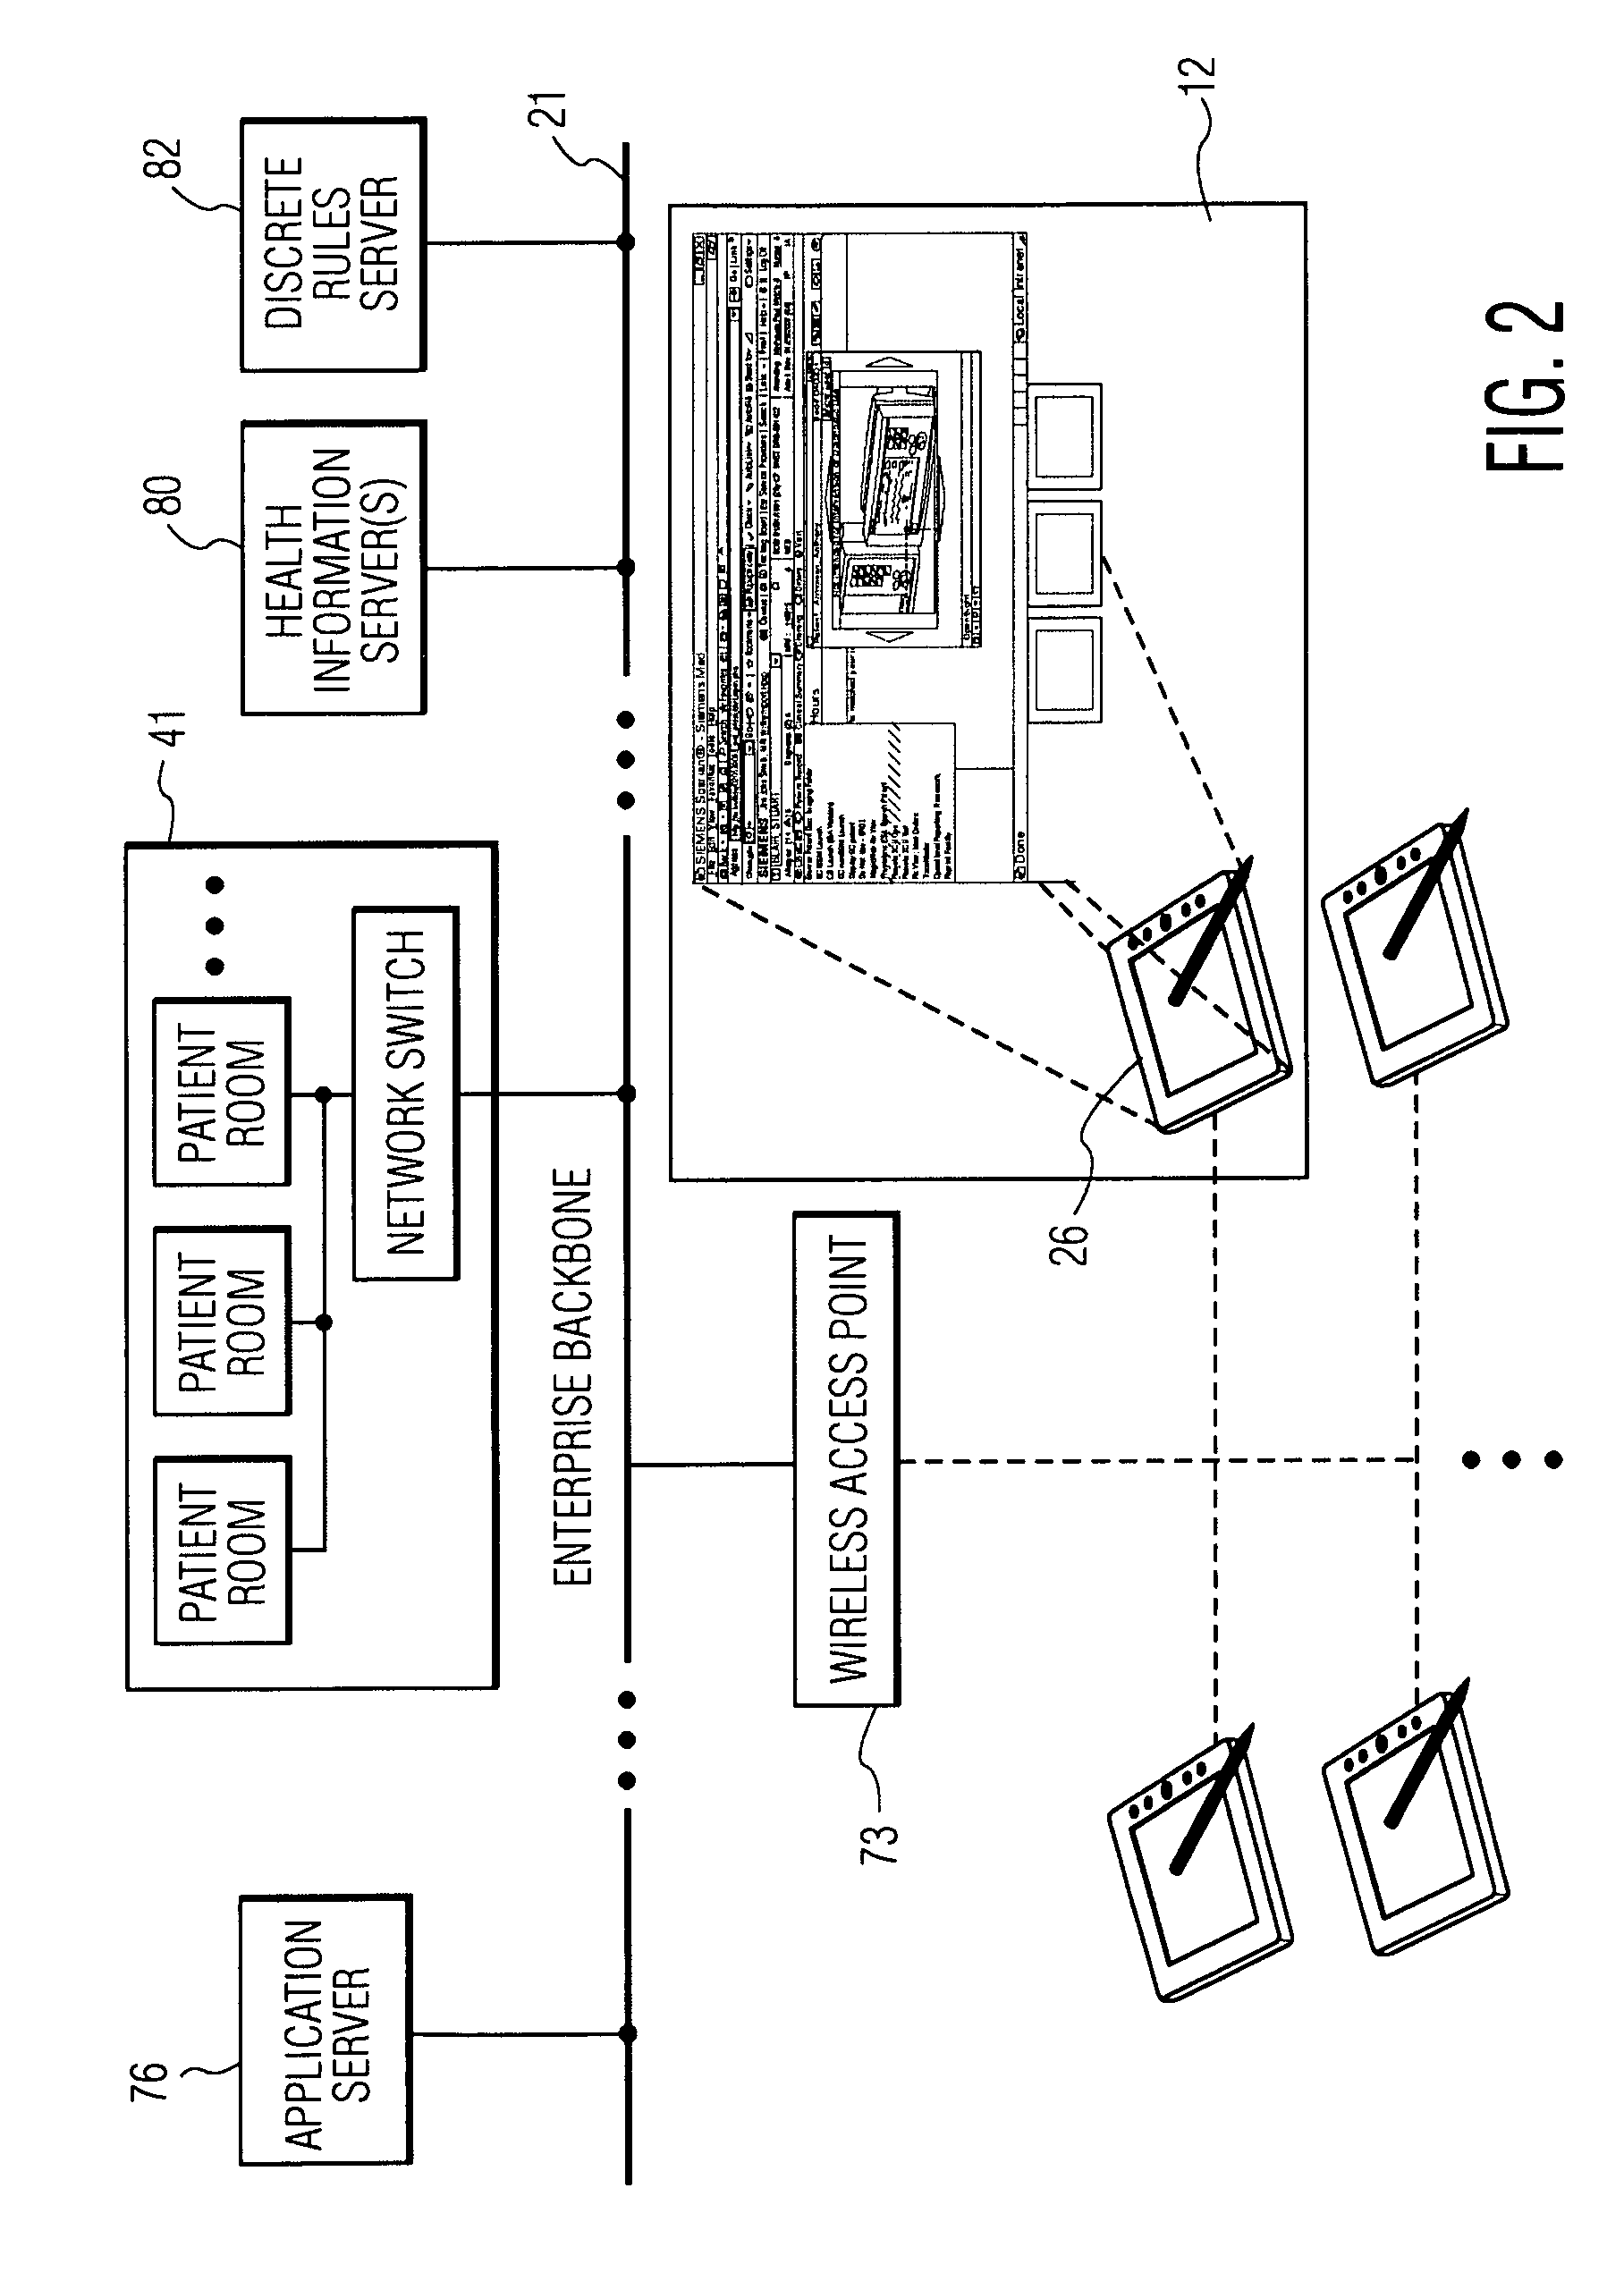 Distributed Patient Monitoring System